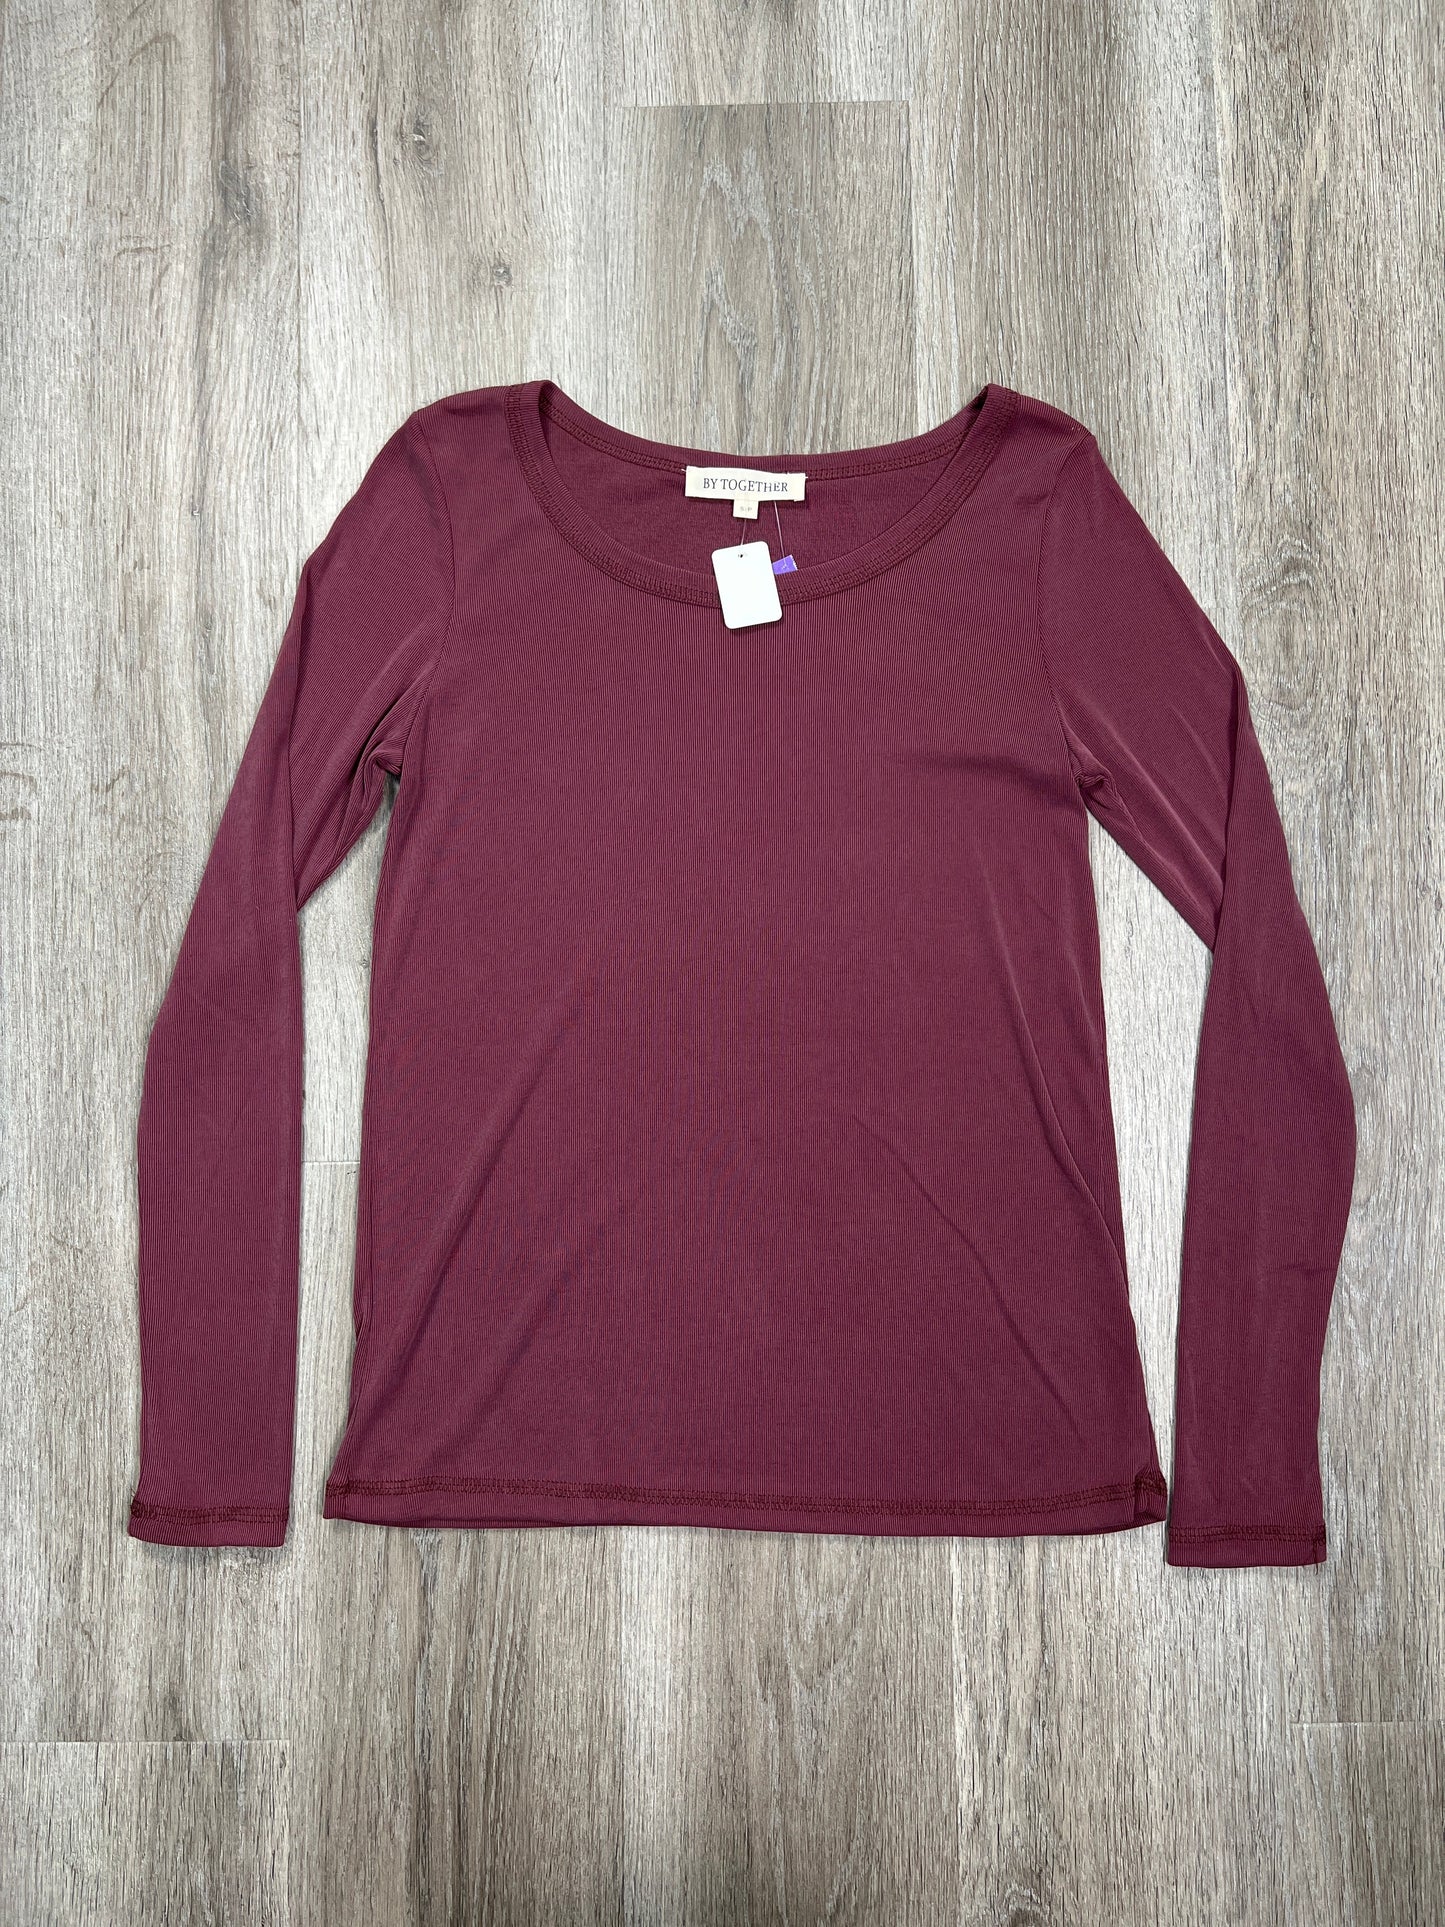 Mauve Top Long Sleeve By Together, Size S